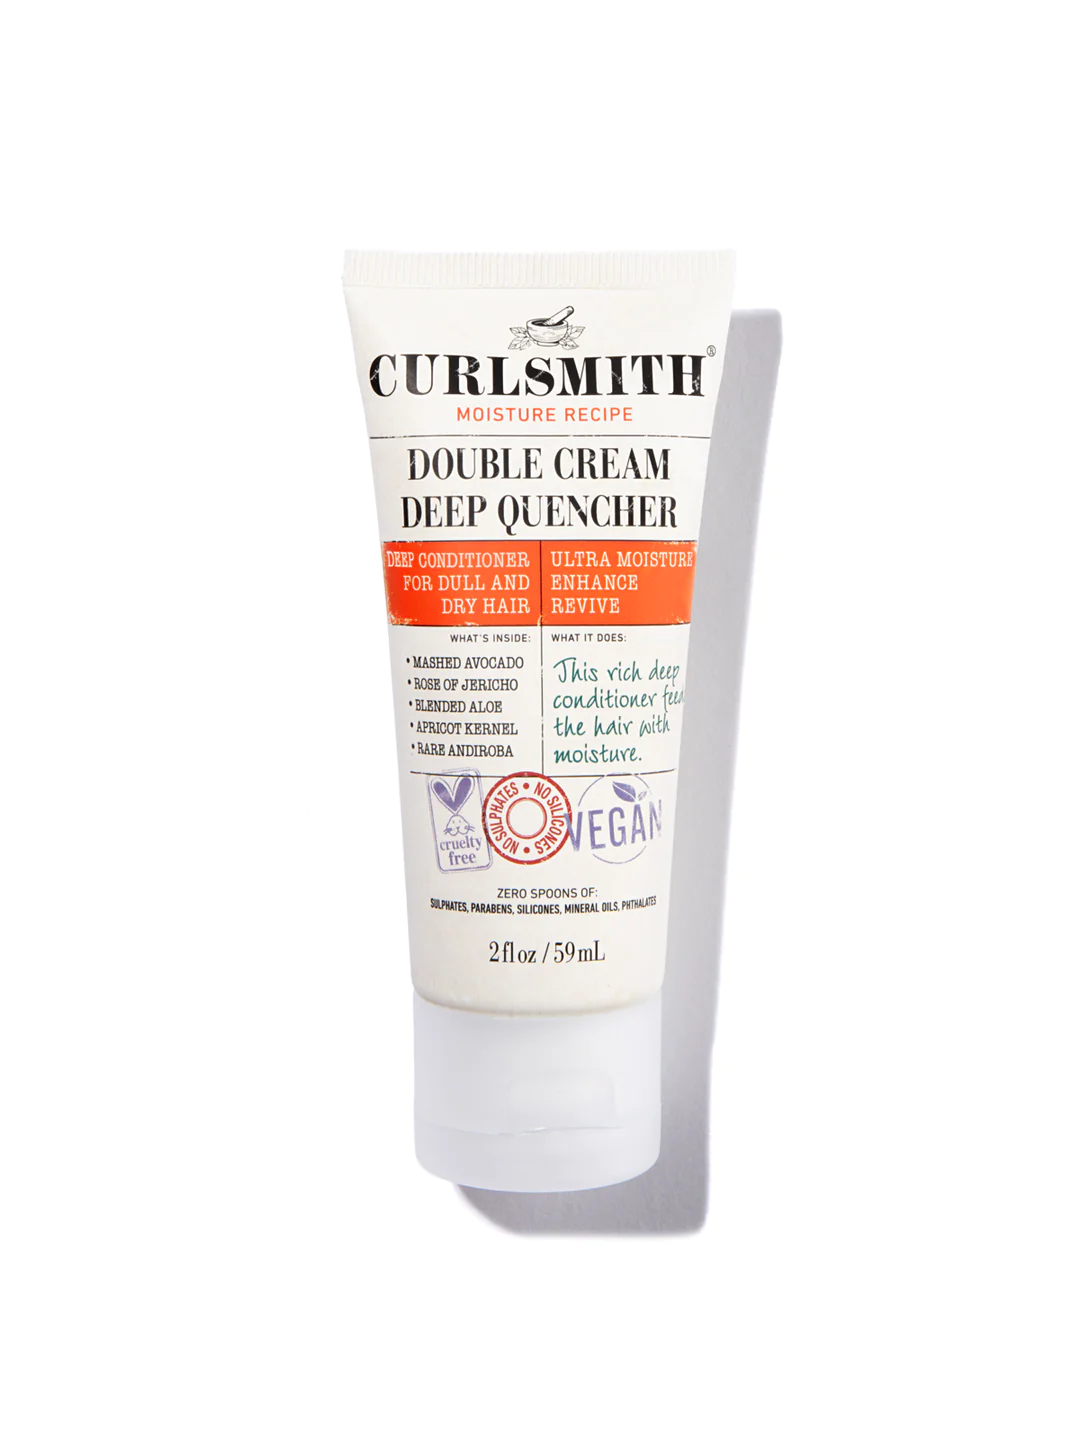 Curlsmith Double Cream Deep Quencher - Travel Size